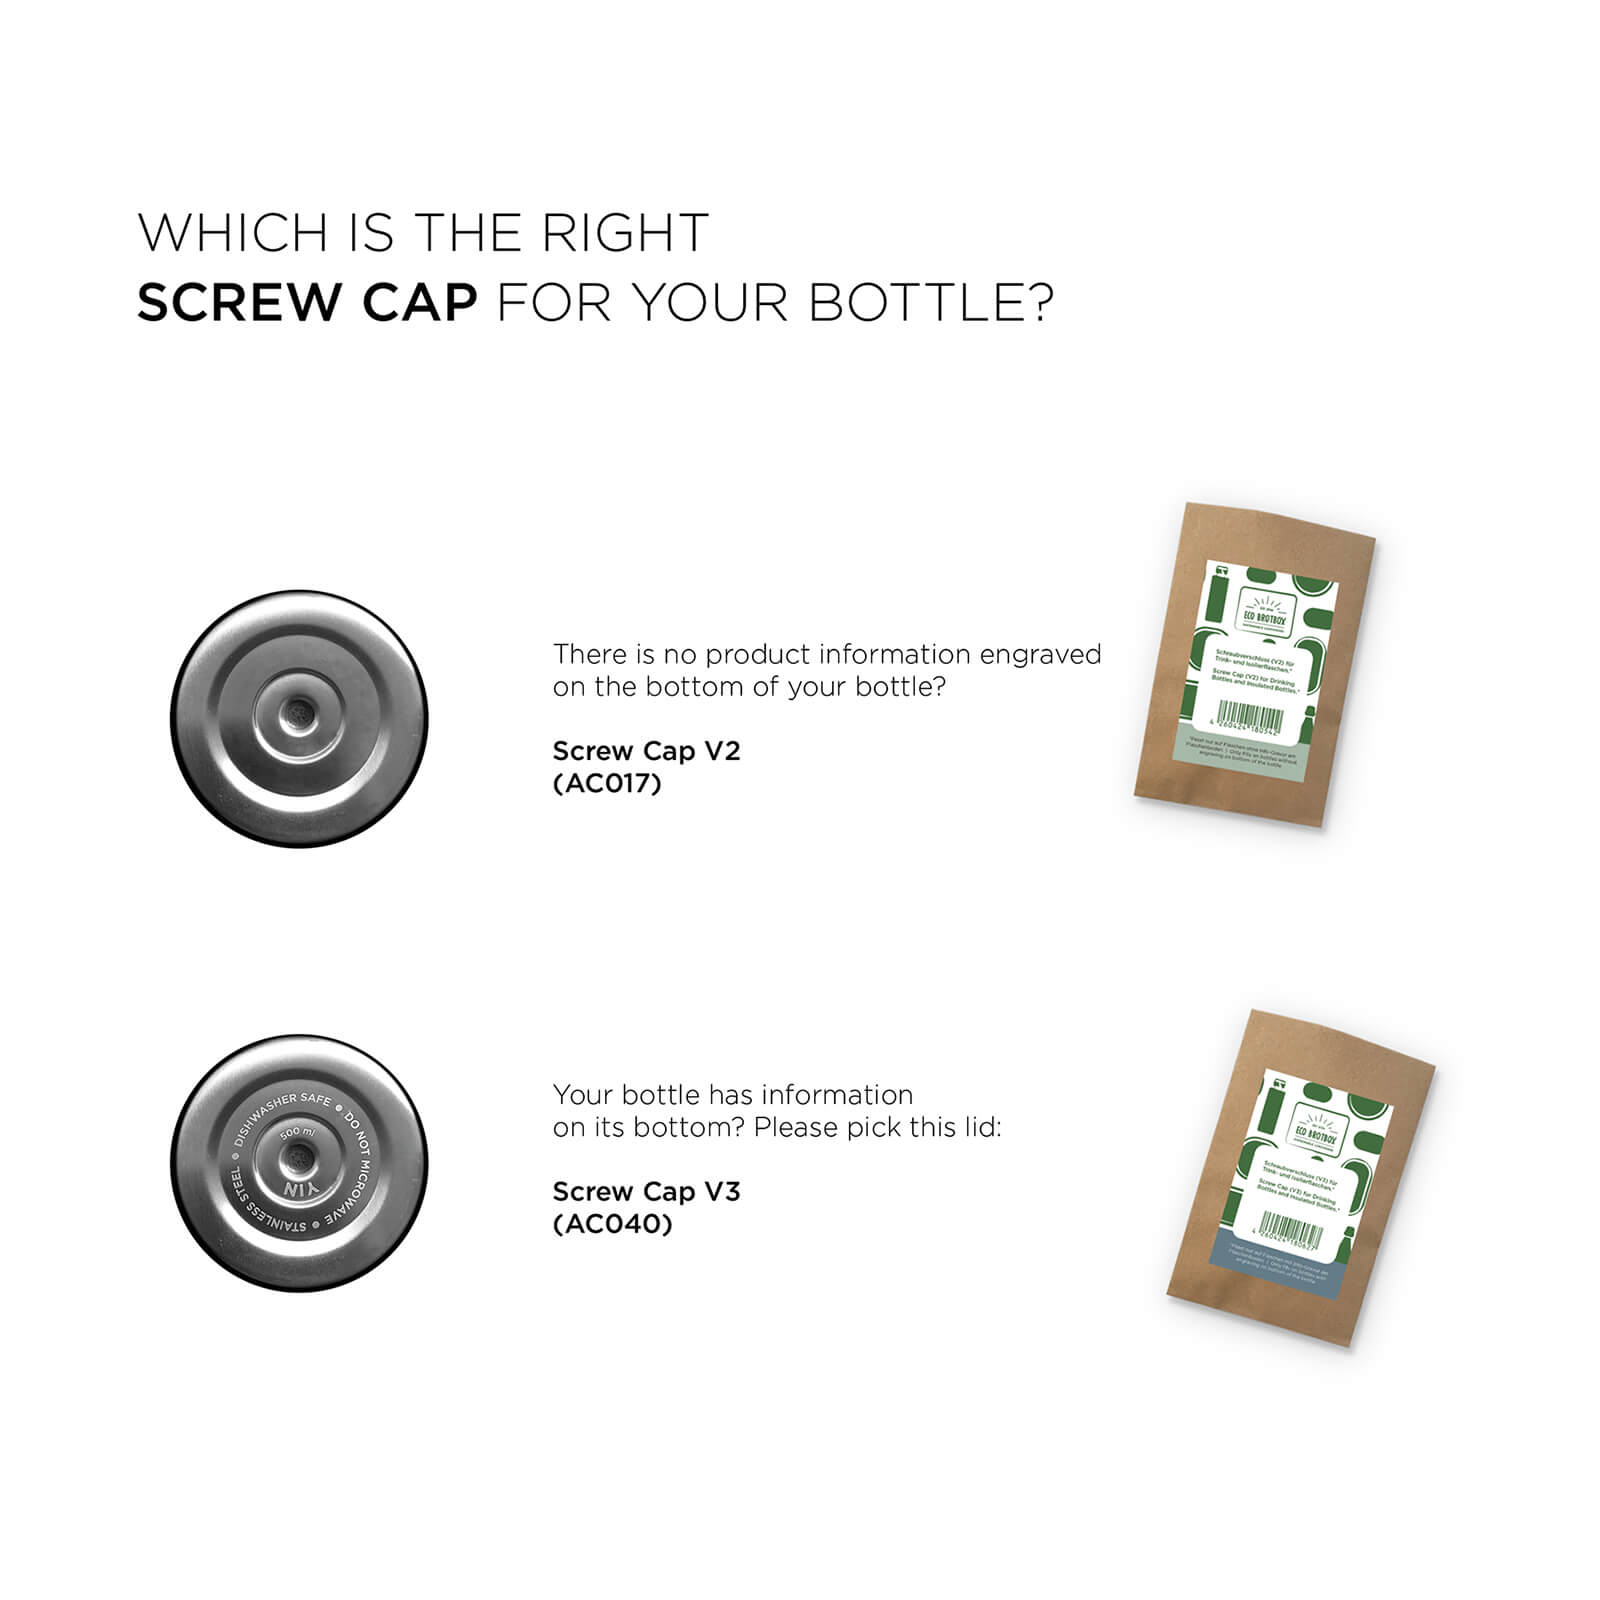 Which lid fits your bottle?